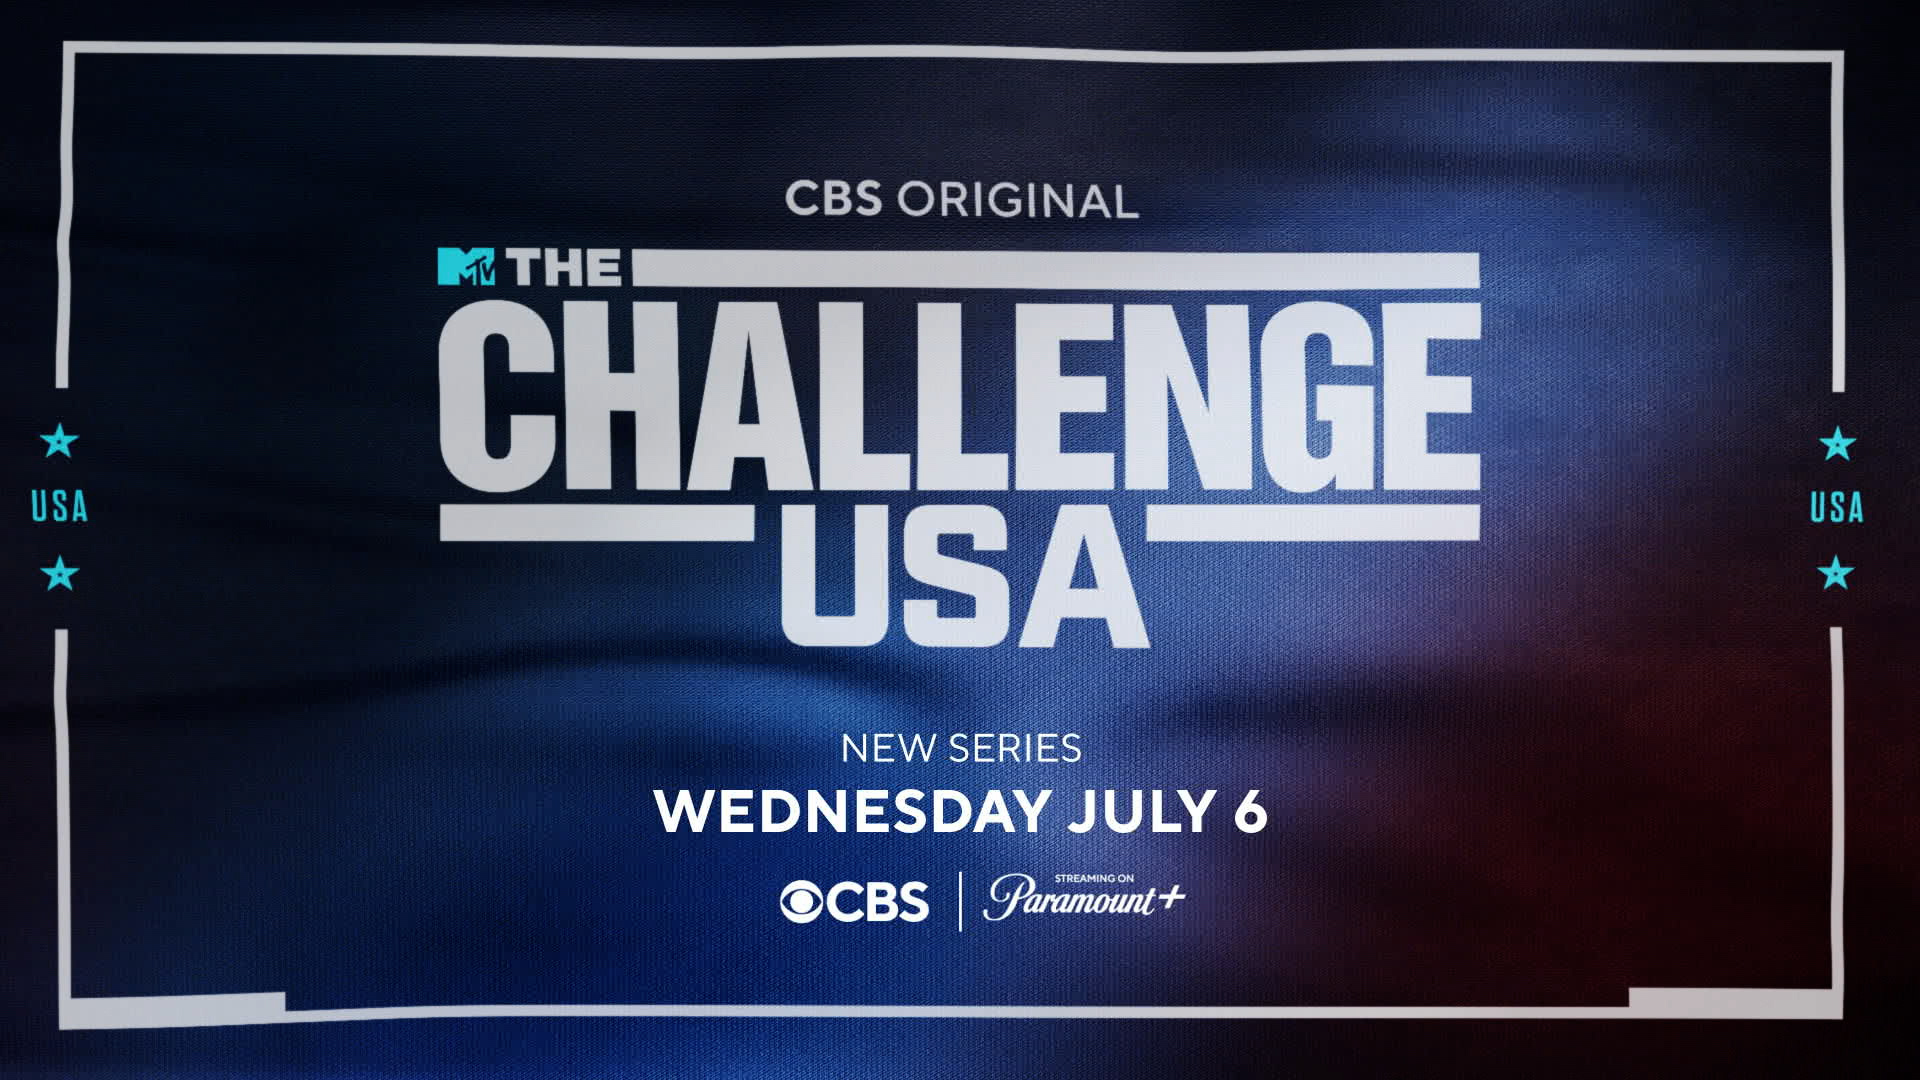 Watch The Challenge USA The OFFICIAL Trailer for The Challenge USA